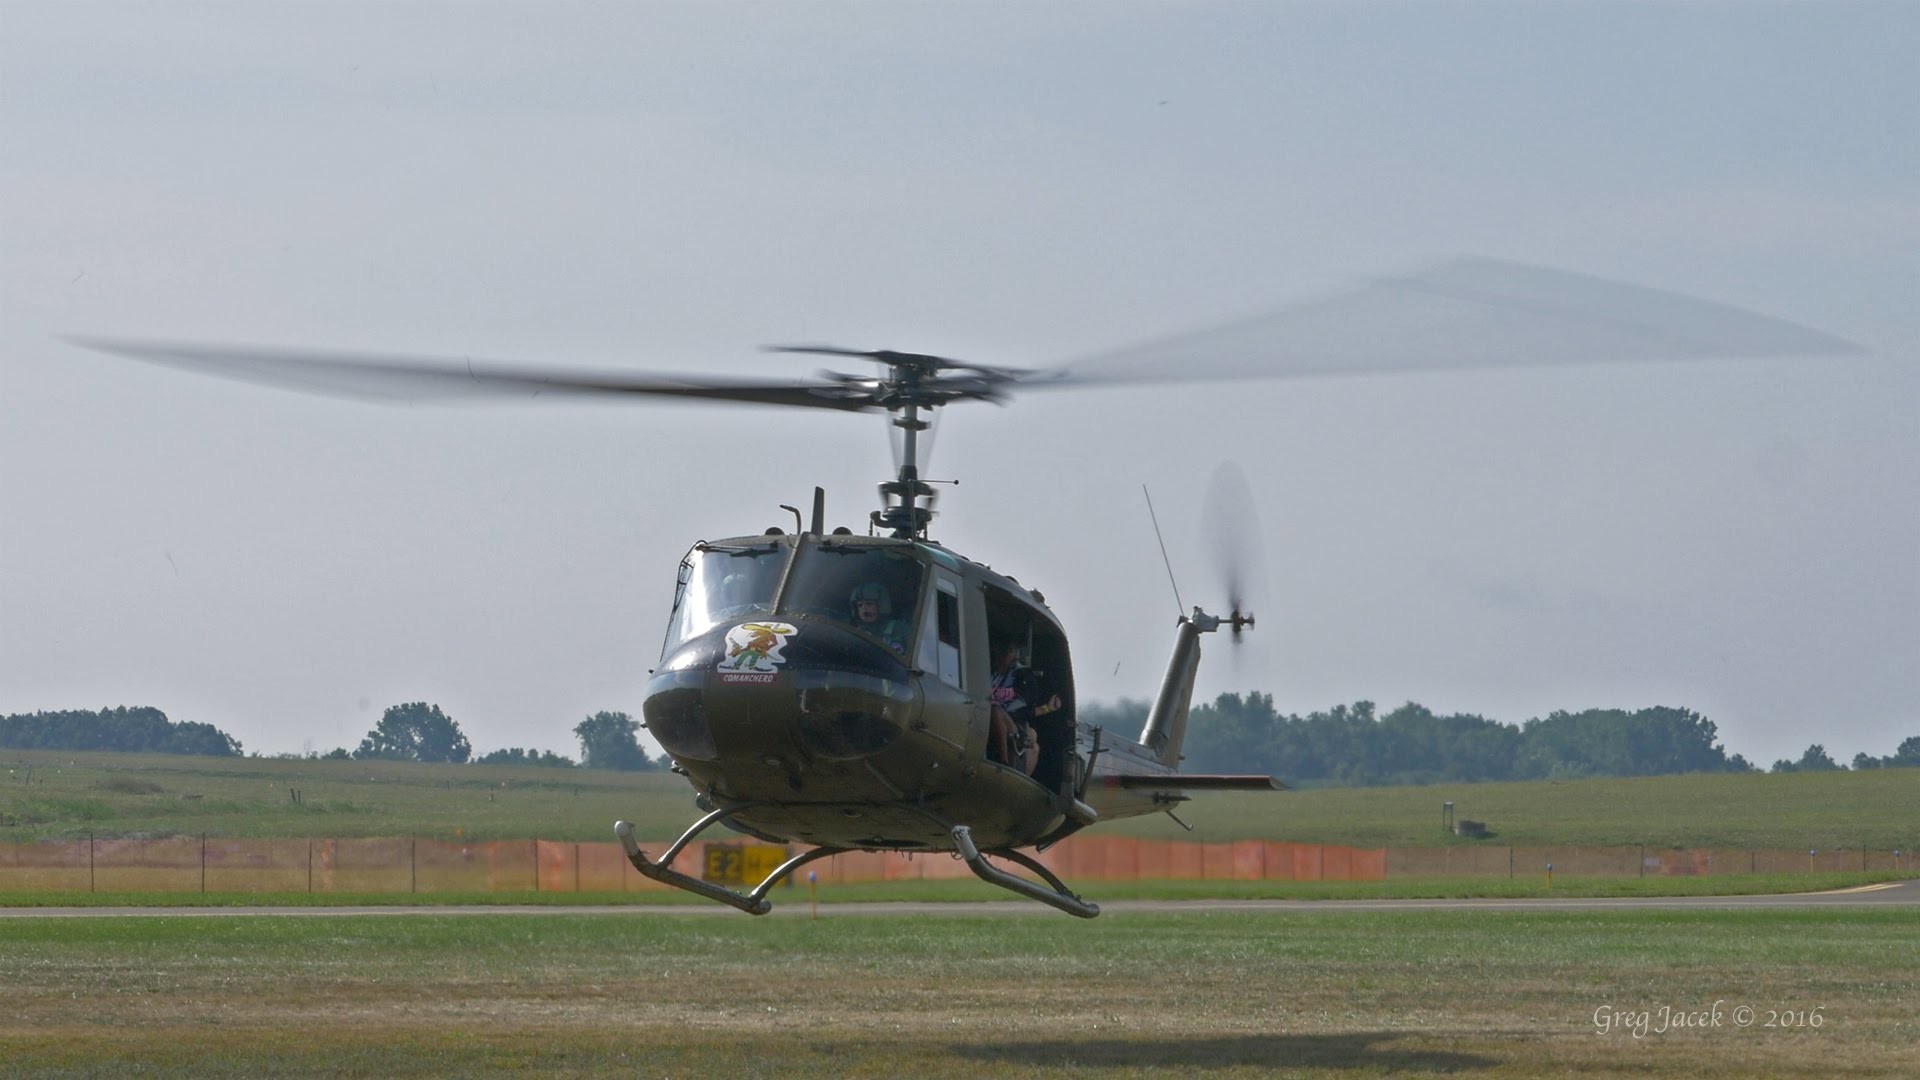 1920x1080 Listen to the legendary UH-1 Huey Startup and Spool up in Surround Sound —  Avgeekery.com - News and stories by Aviation Professionals